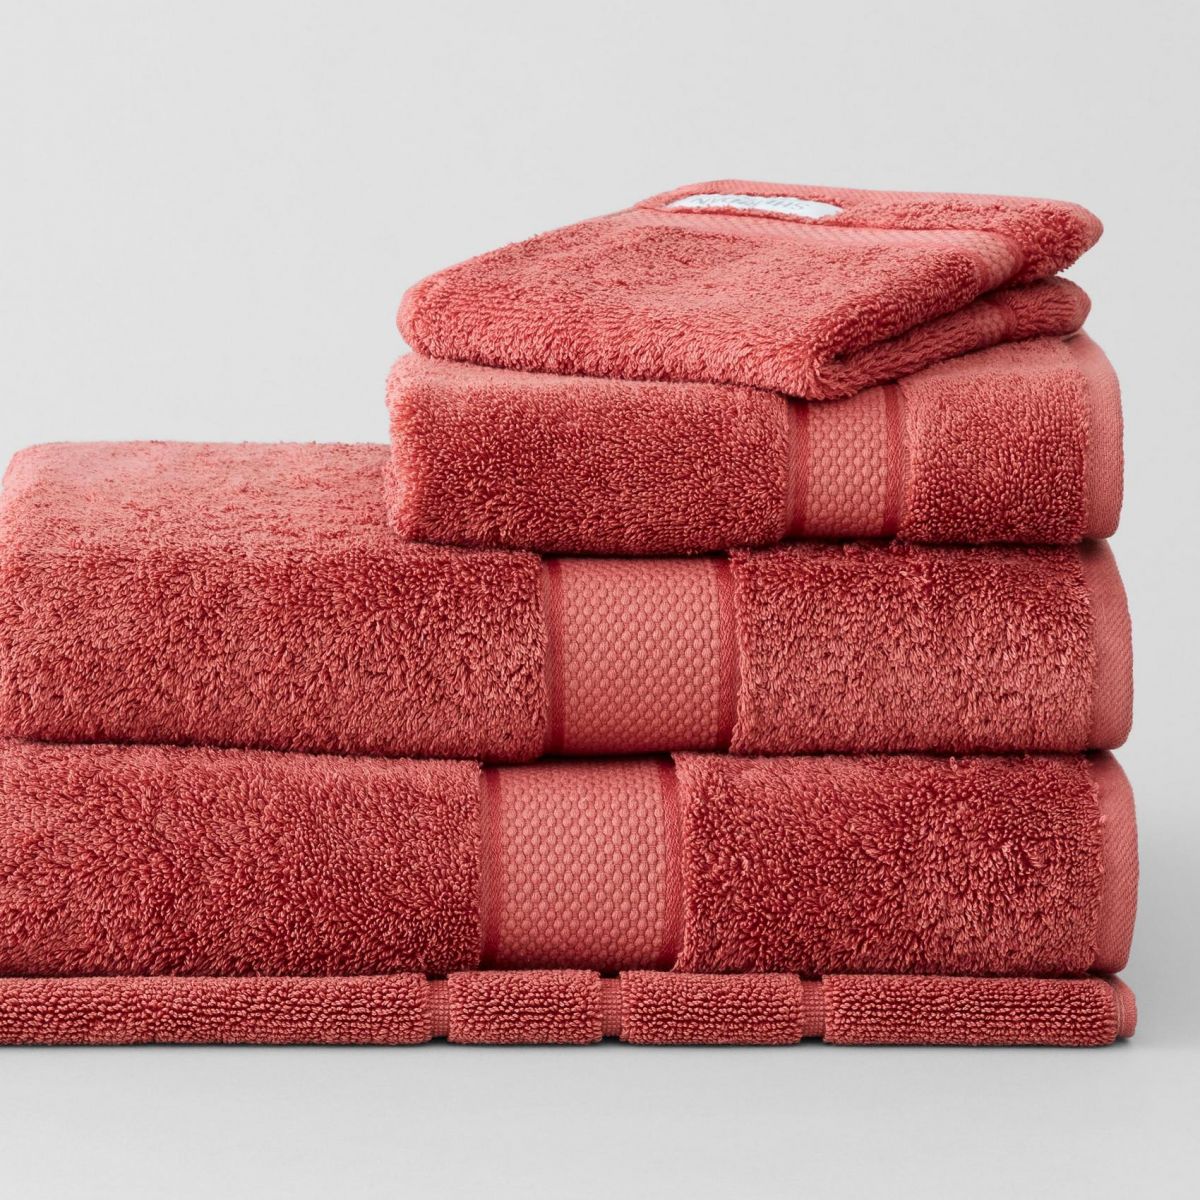 Sheridan Luxury Egyptian Towel Collection Raspberry - Finnys Manchester